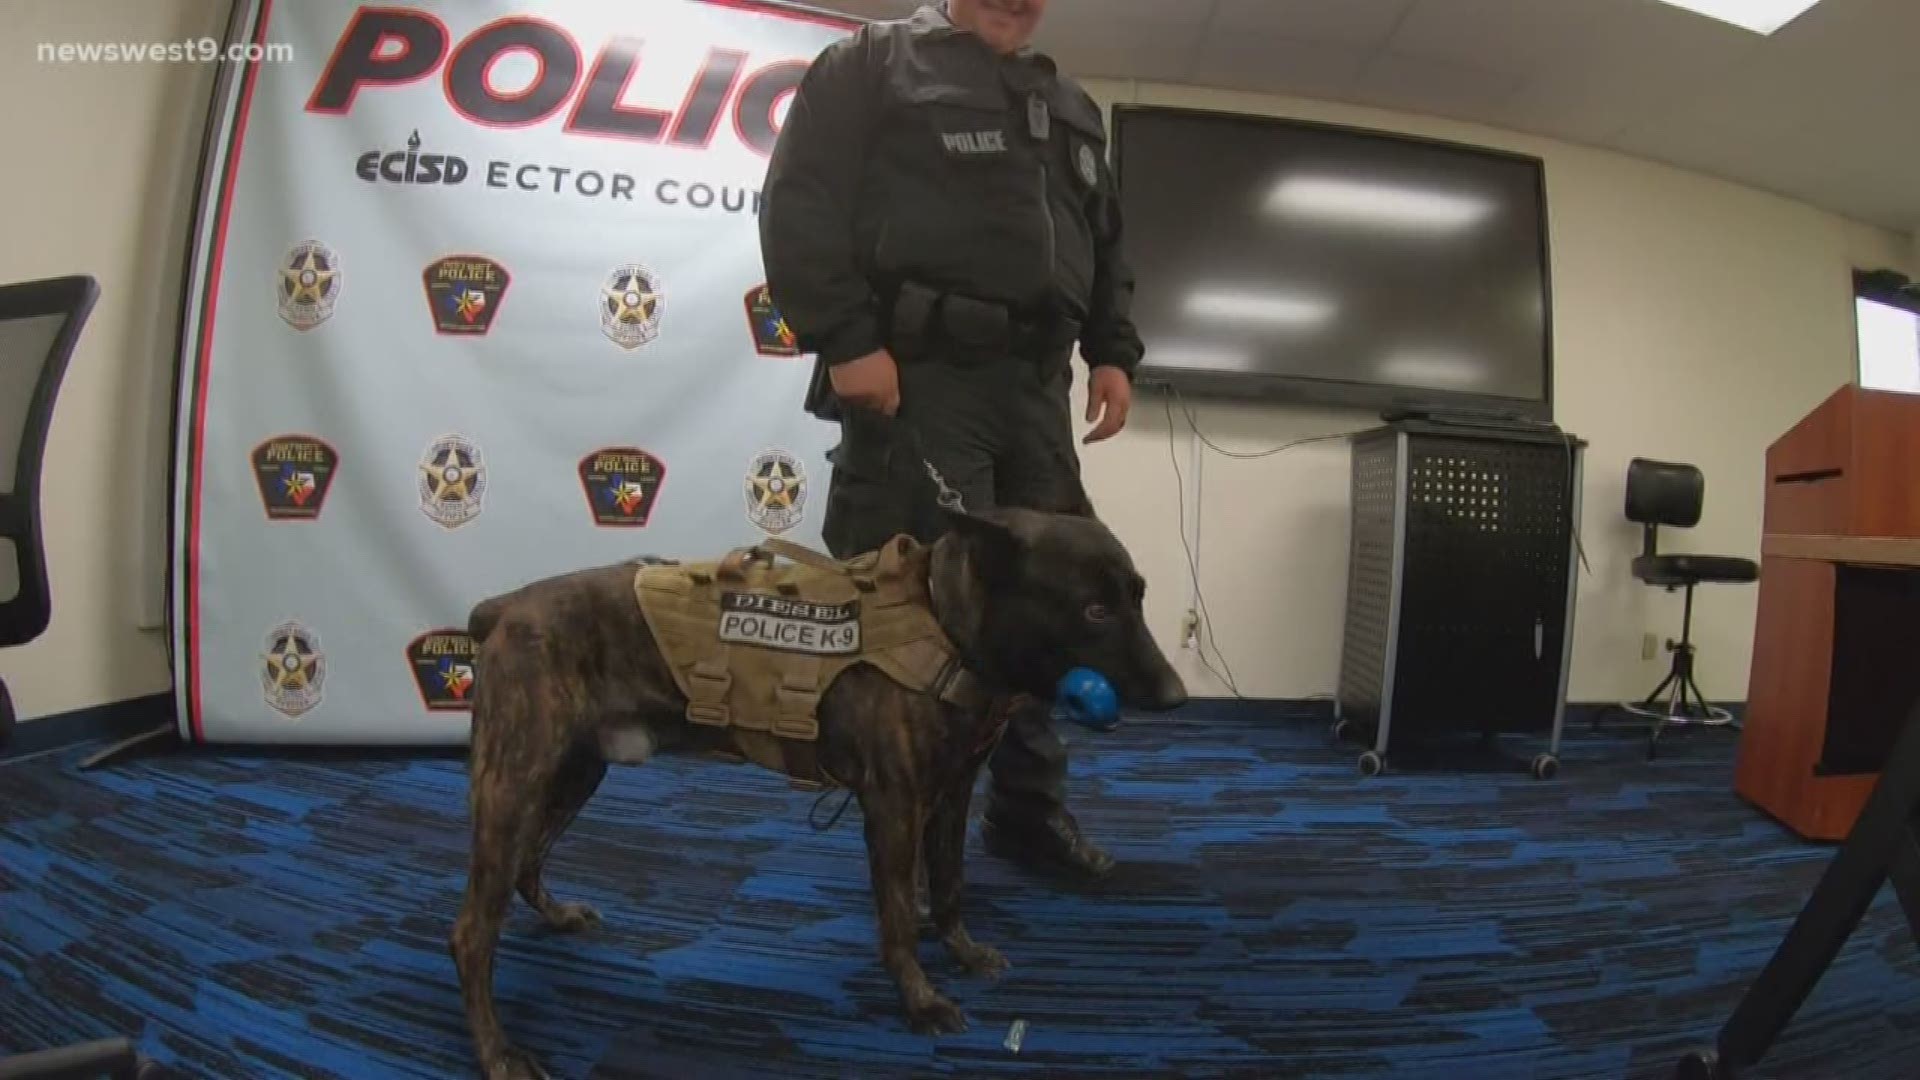 The board approved $150,00 to purchase a weapons K9 officer. ECISD will be the first school district in West Texas to utilize a full-time weapons K9.